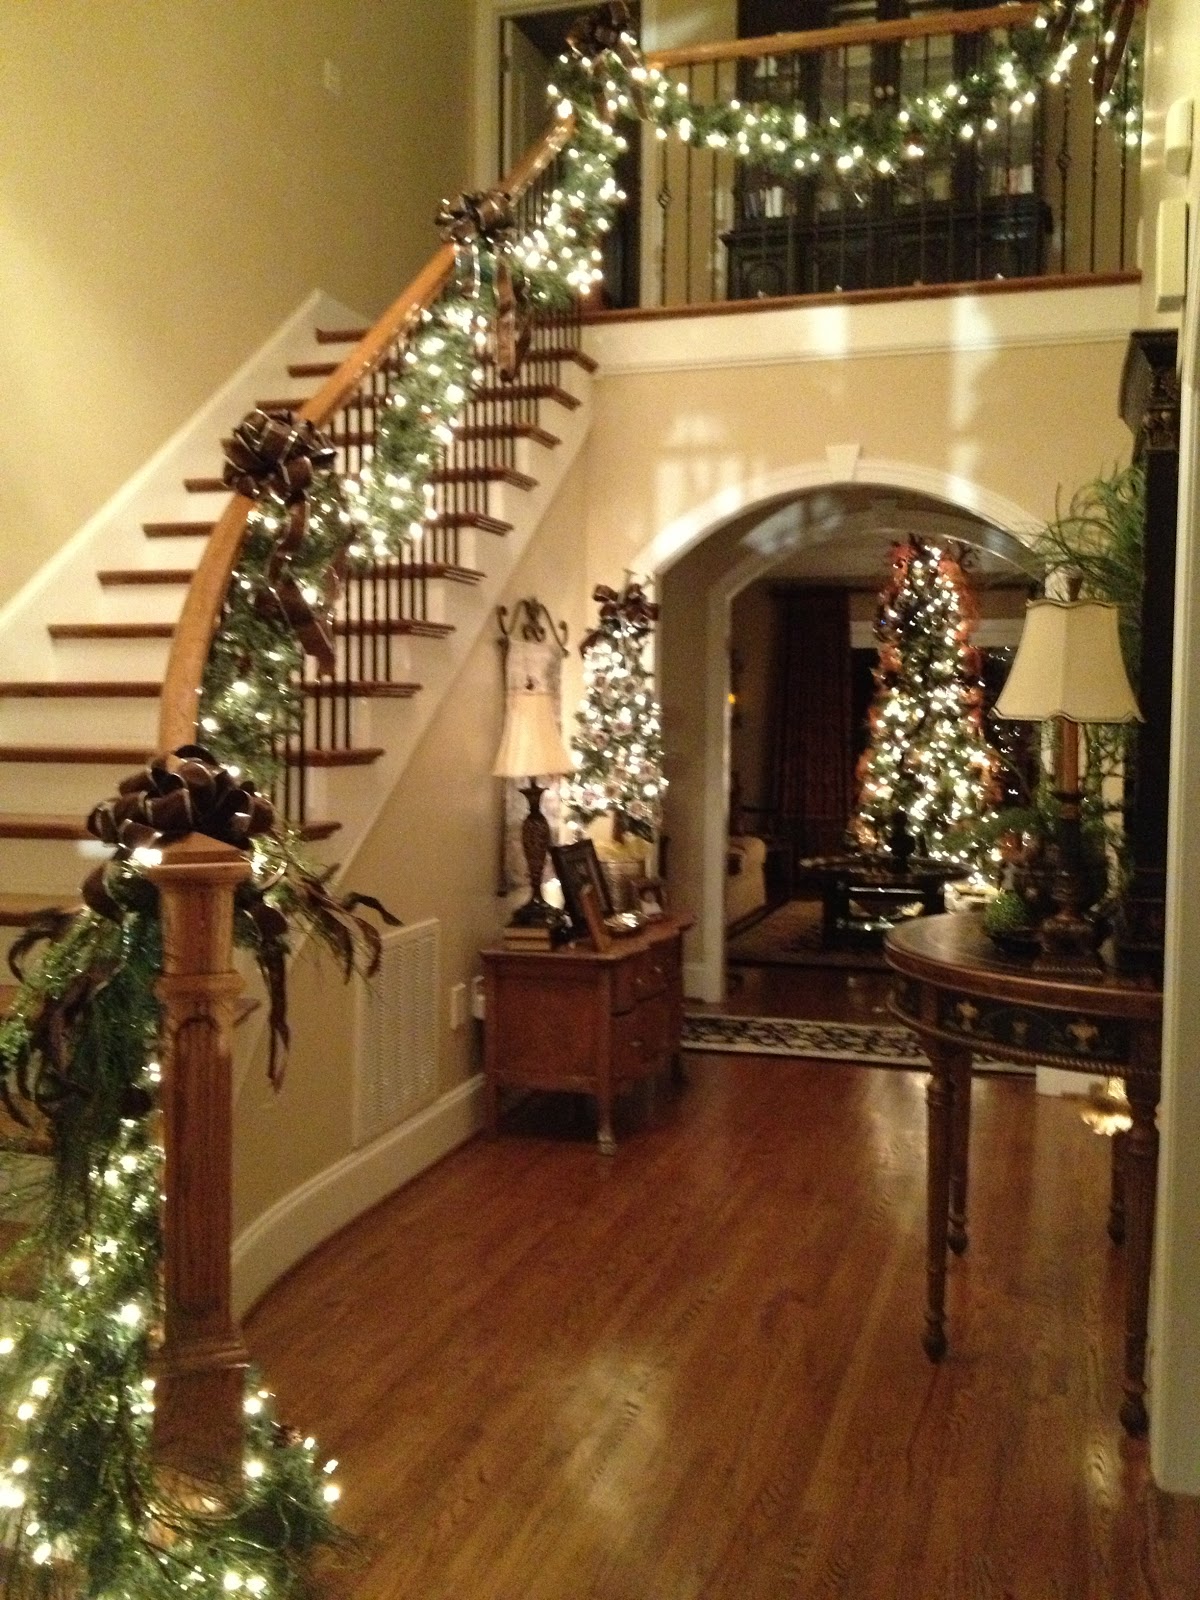 Southern 'n Sassy Christmas Garland On the Stairs